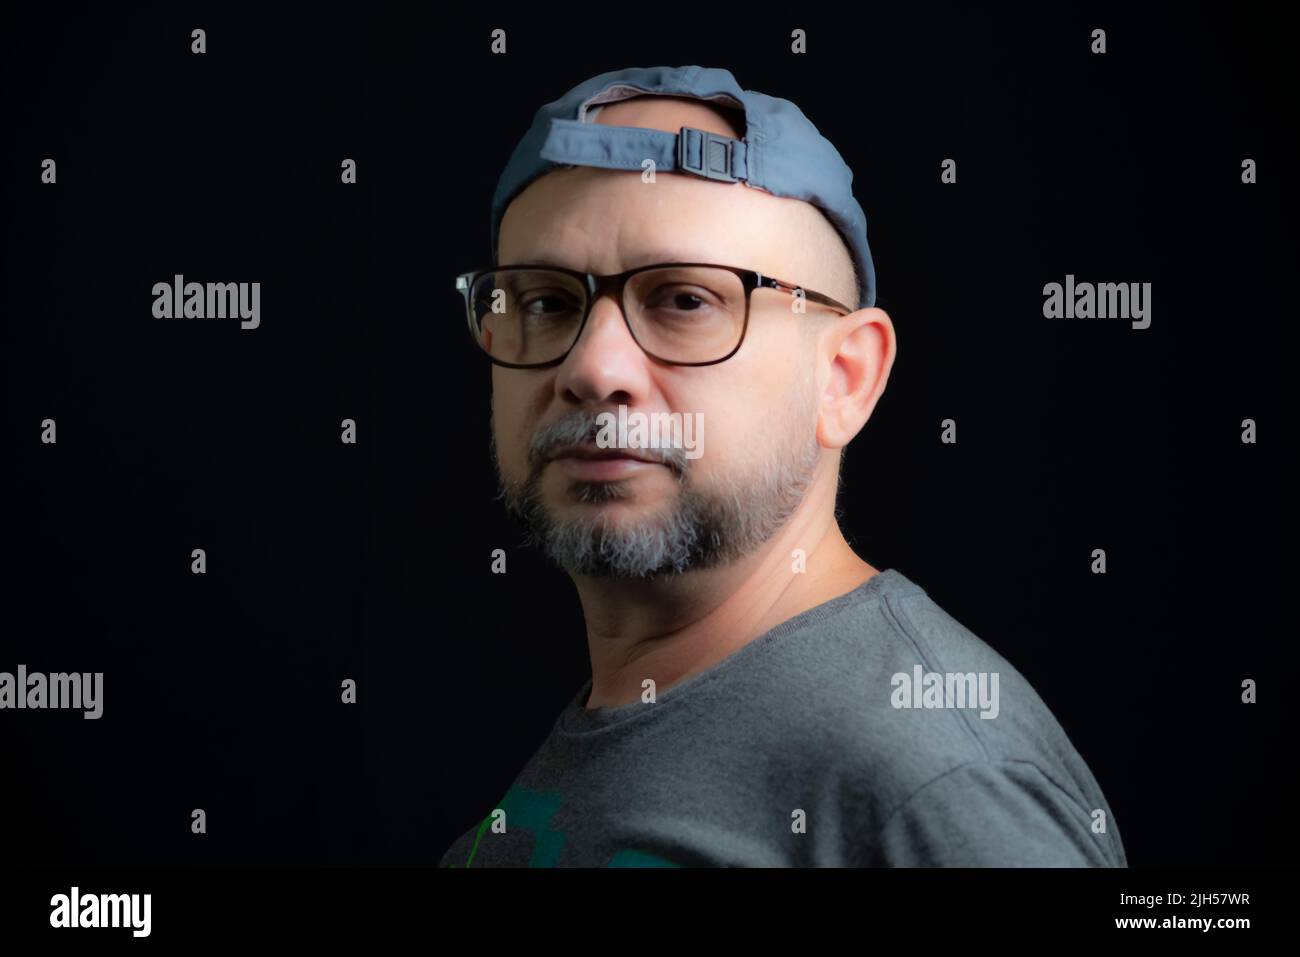 Portrait of a bald bearded man wearing cap and glasses looking at the camera against a black background. Salvador, Bahia, Brazil. Stock Photo